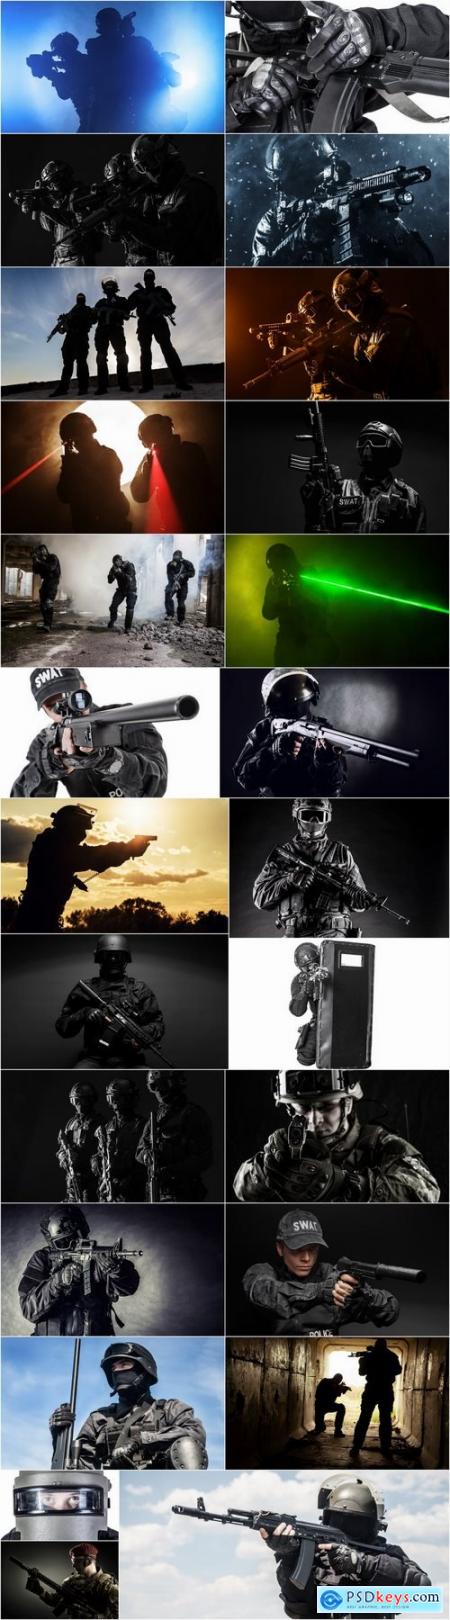 Special forces antiterrorist squad soldier soldiers police weapons 25 HQ Jpeg